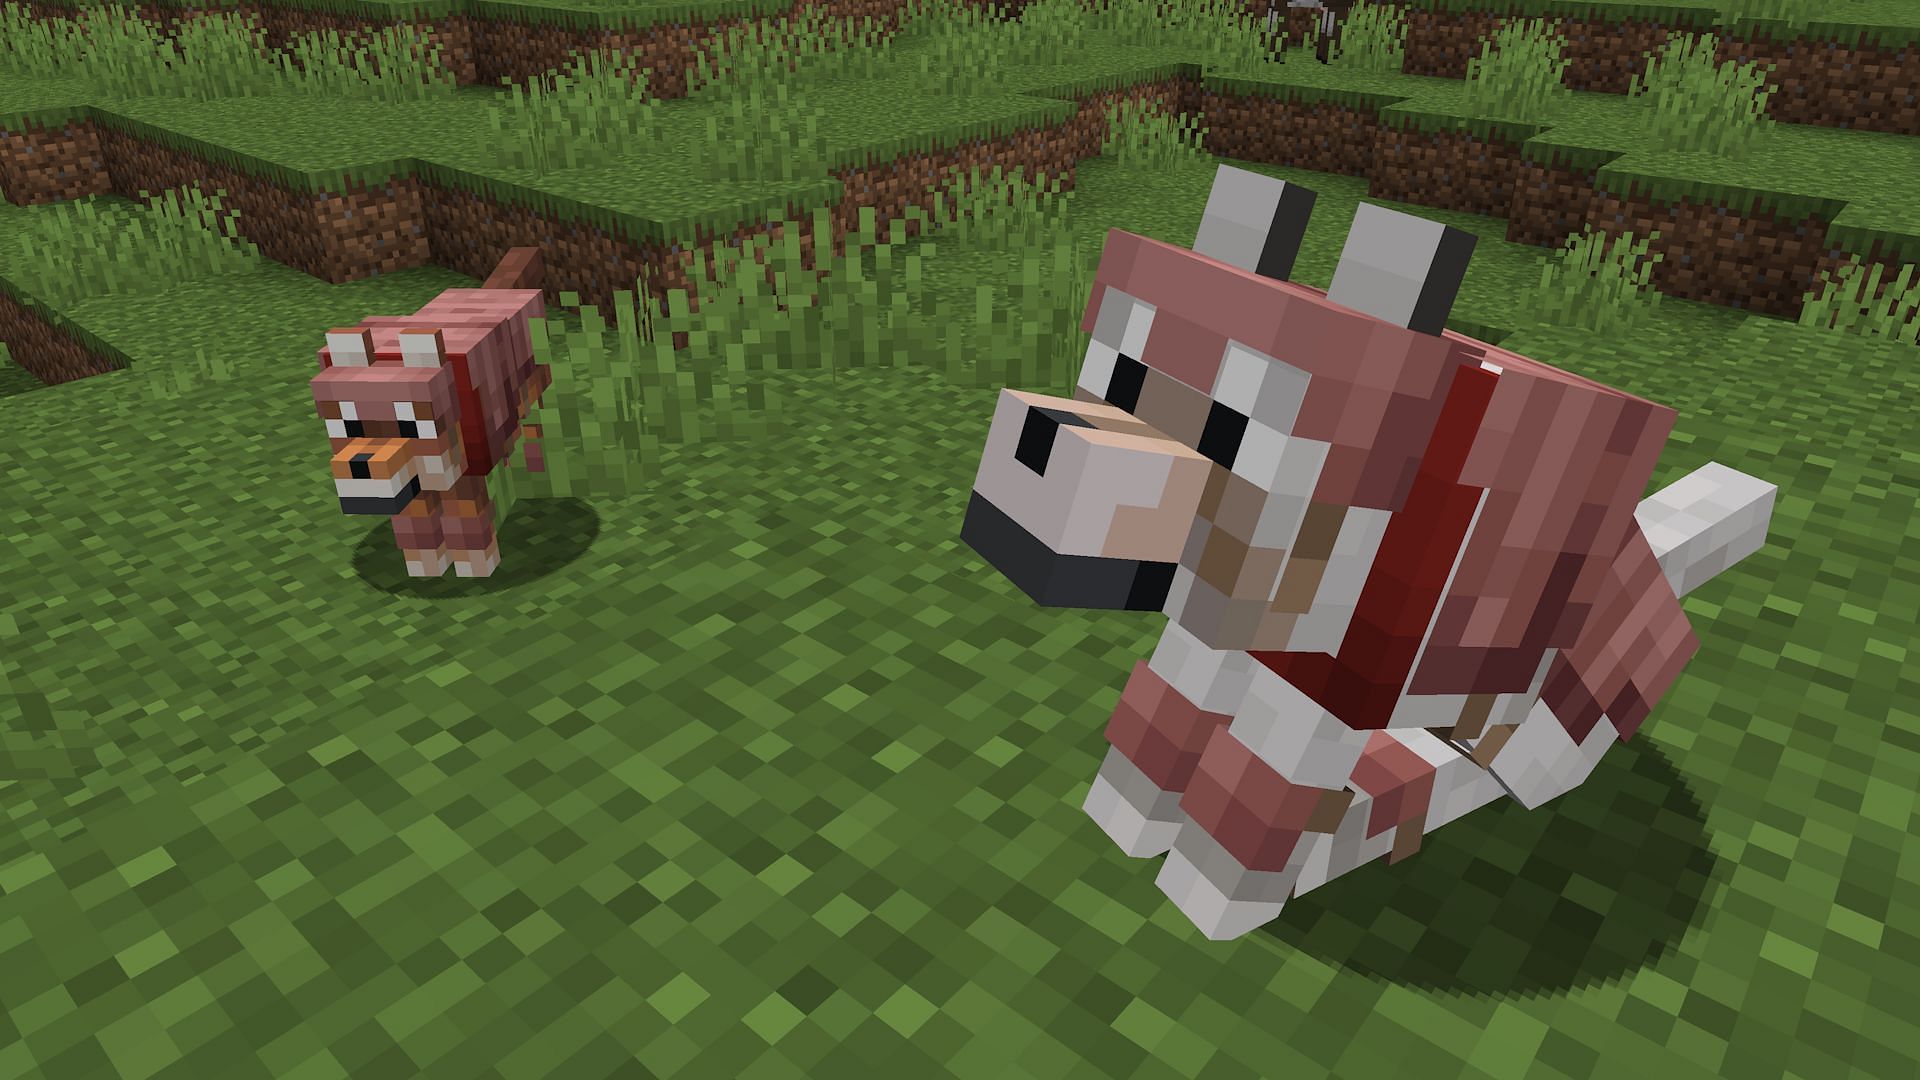 Snip it! is one of several new advancements focused on wolf armor (Image via Mojang)